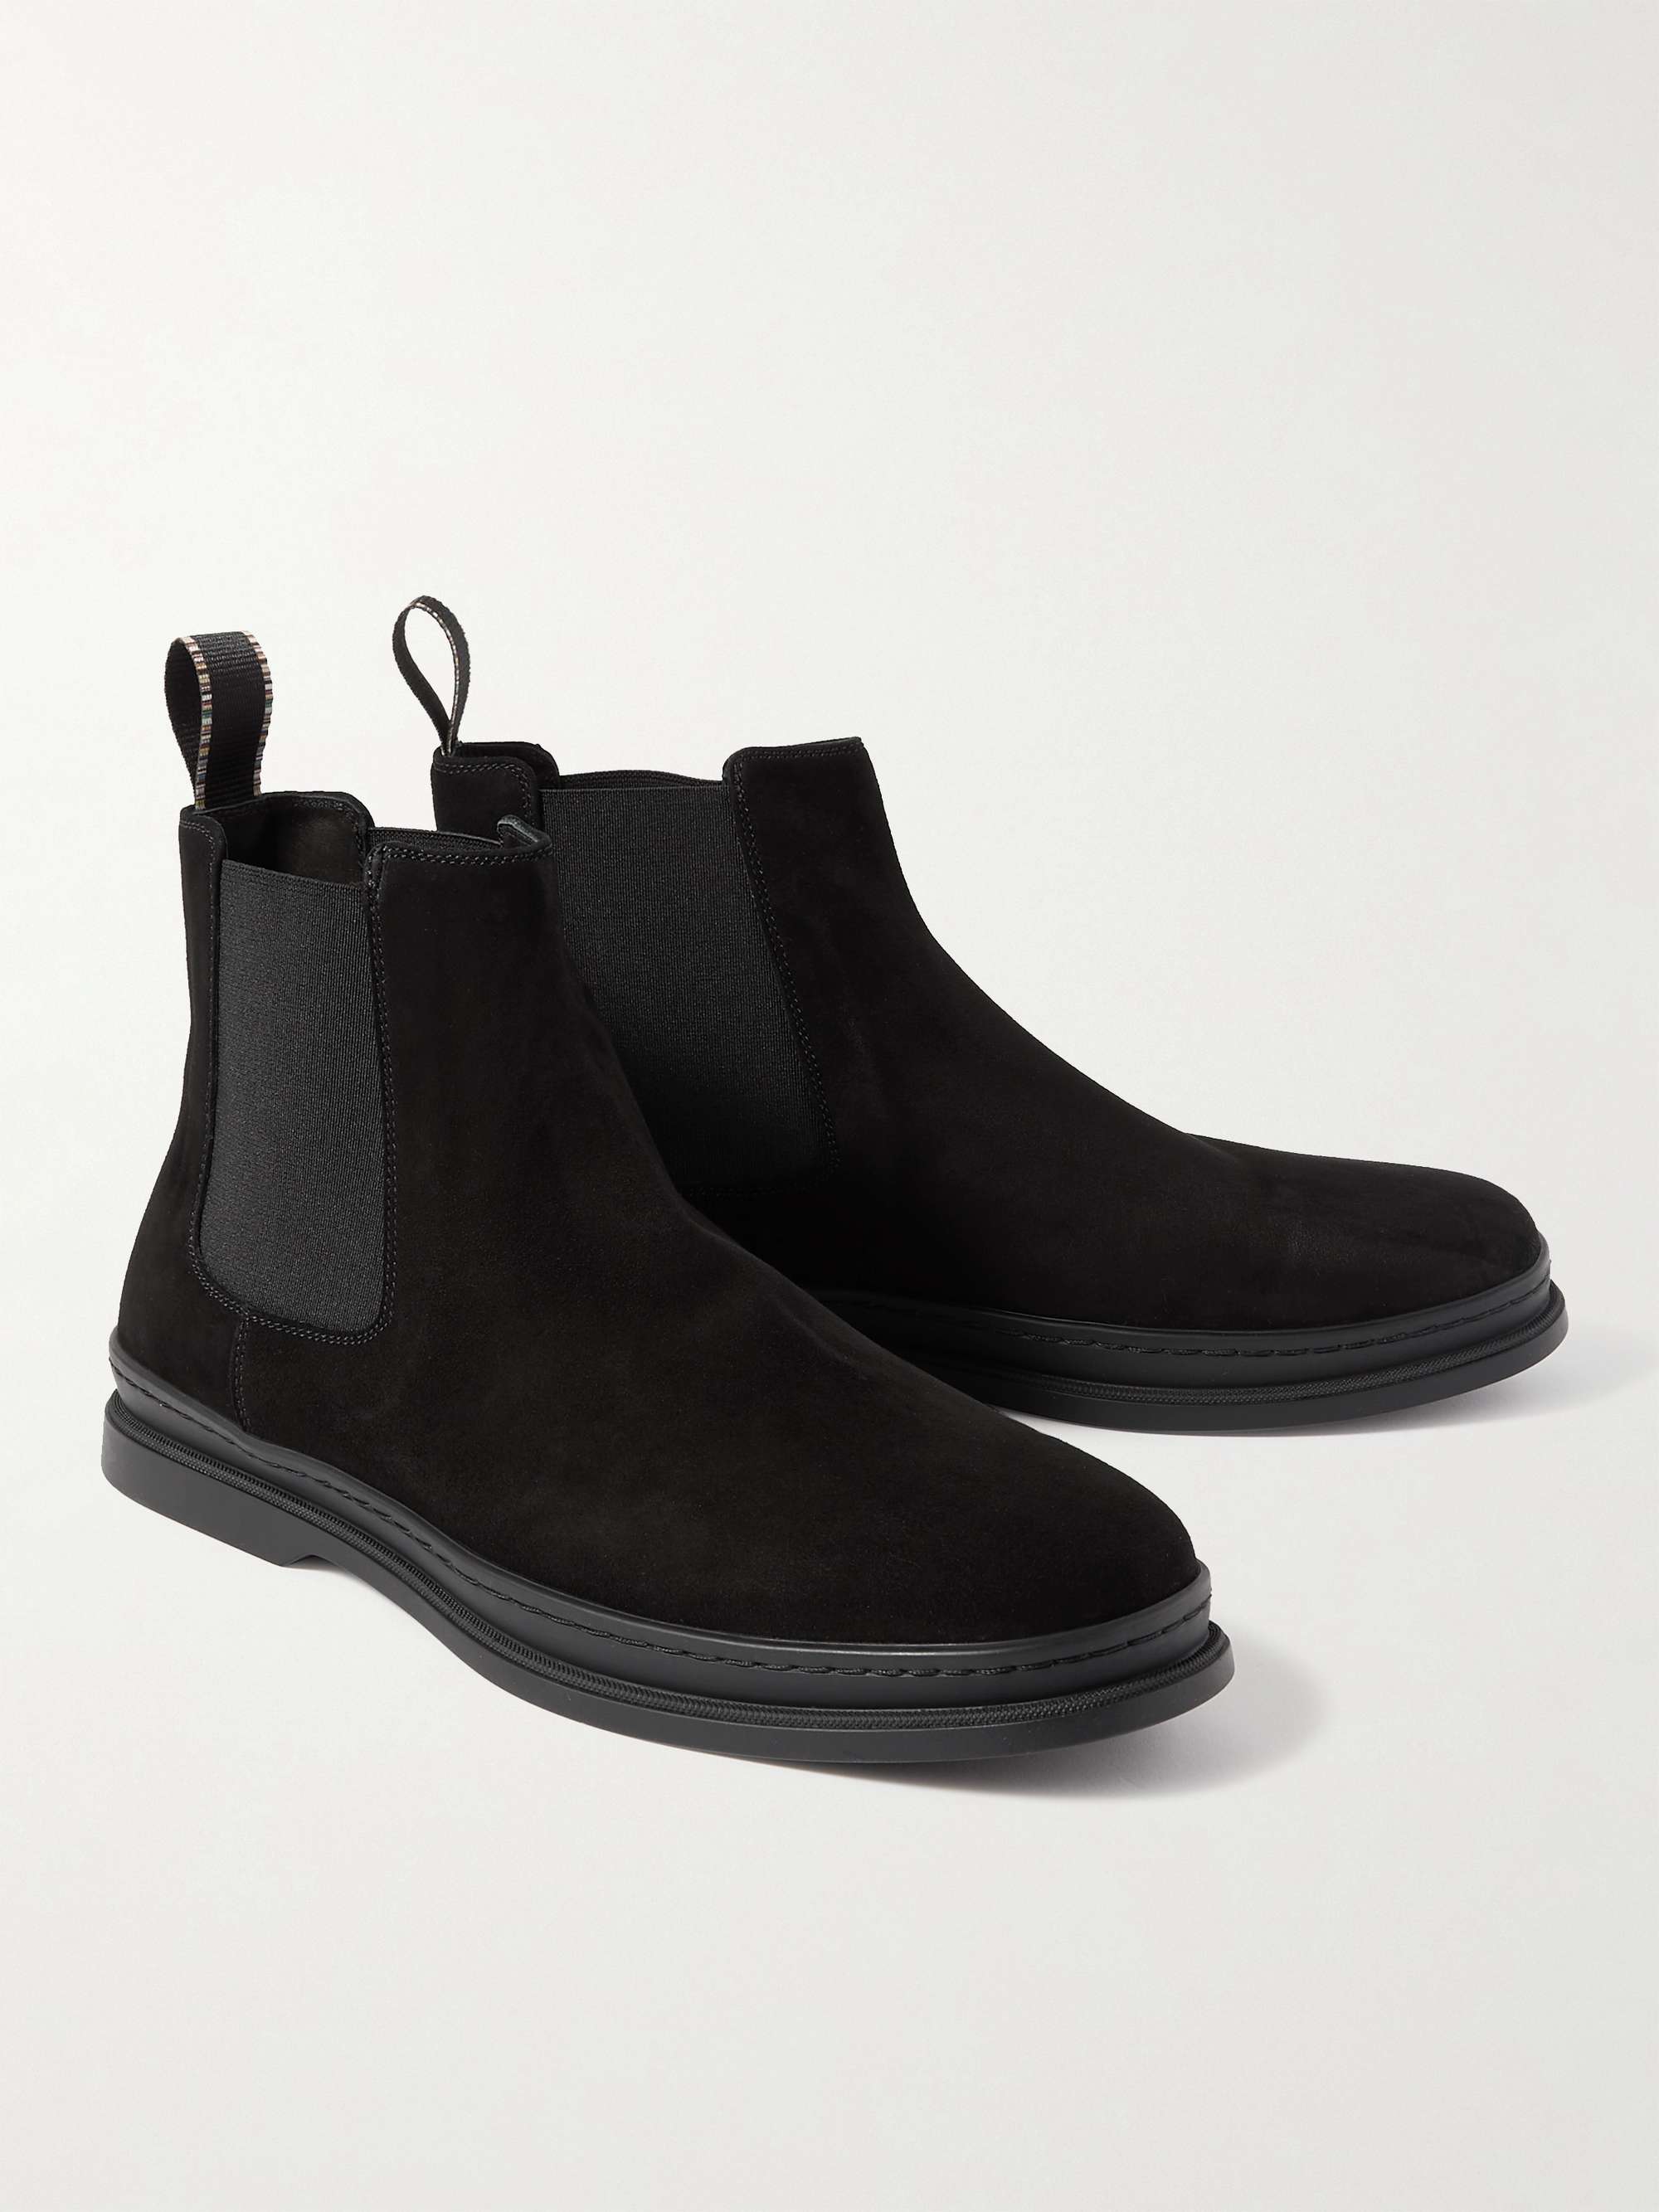 PAUL SMITH Ugo Suede Chelsea Boots